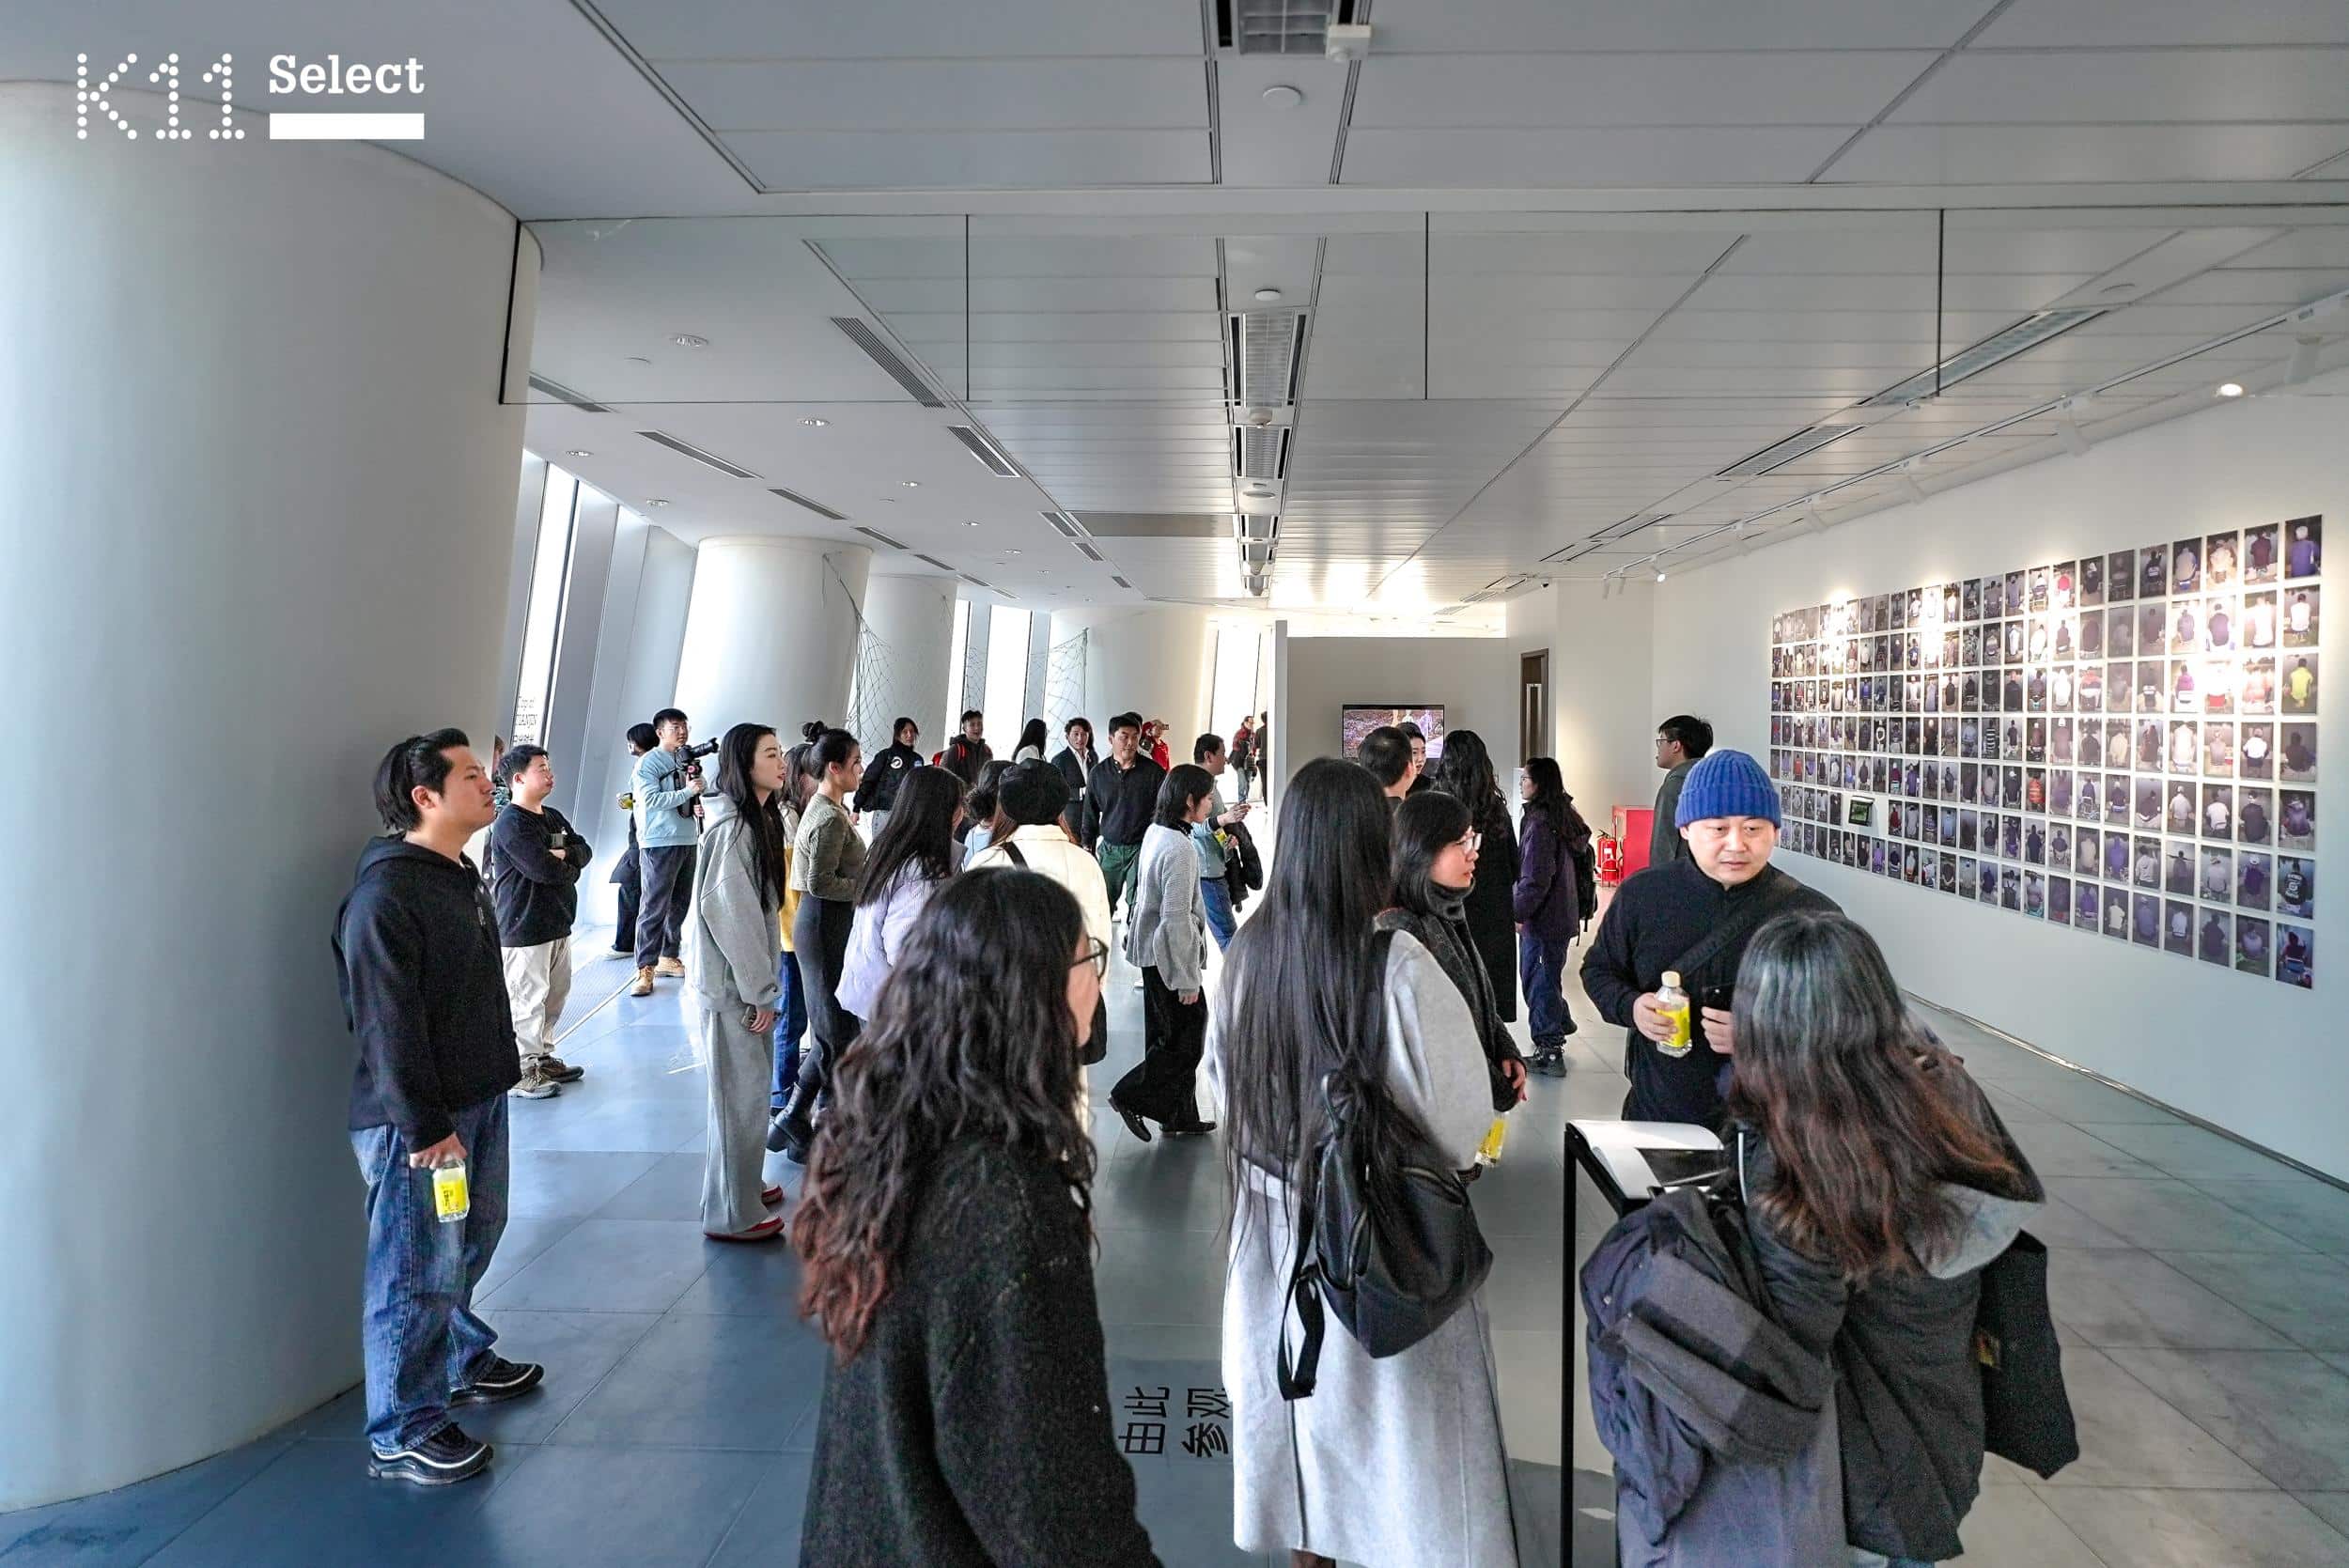 Tianjin K11 Select cooperates with the School of Experimental Art of Tianjin Academy of Fine Arts to launch a new art project “Step Plan 3.0 – Sparkling Light”